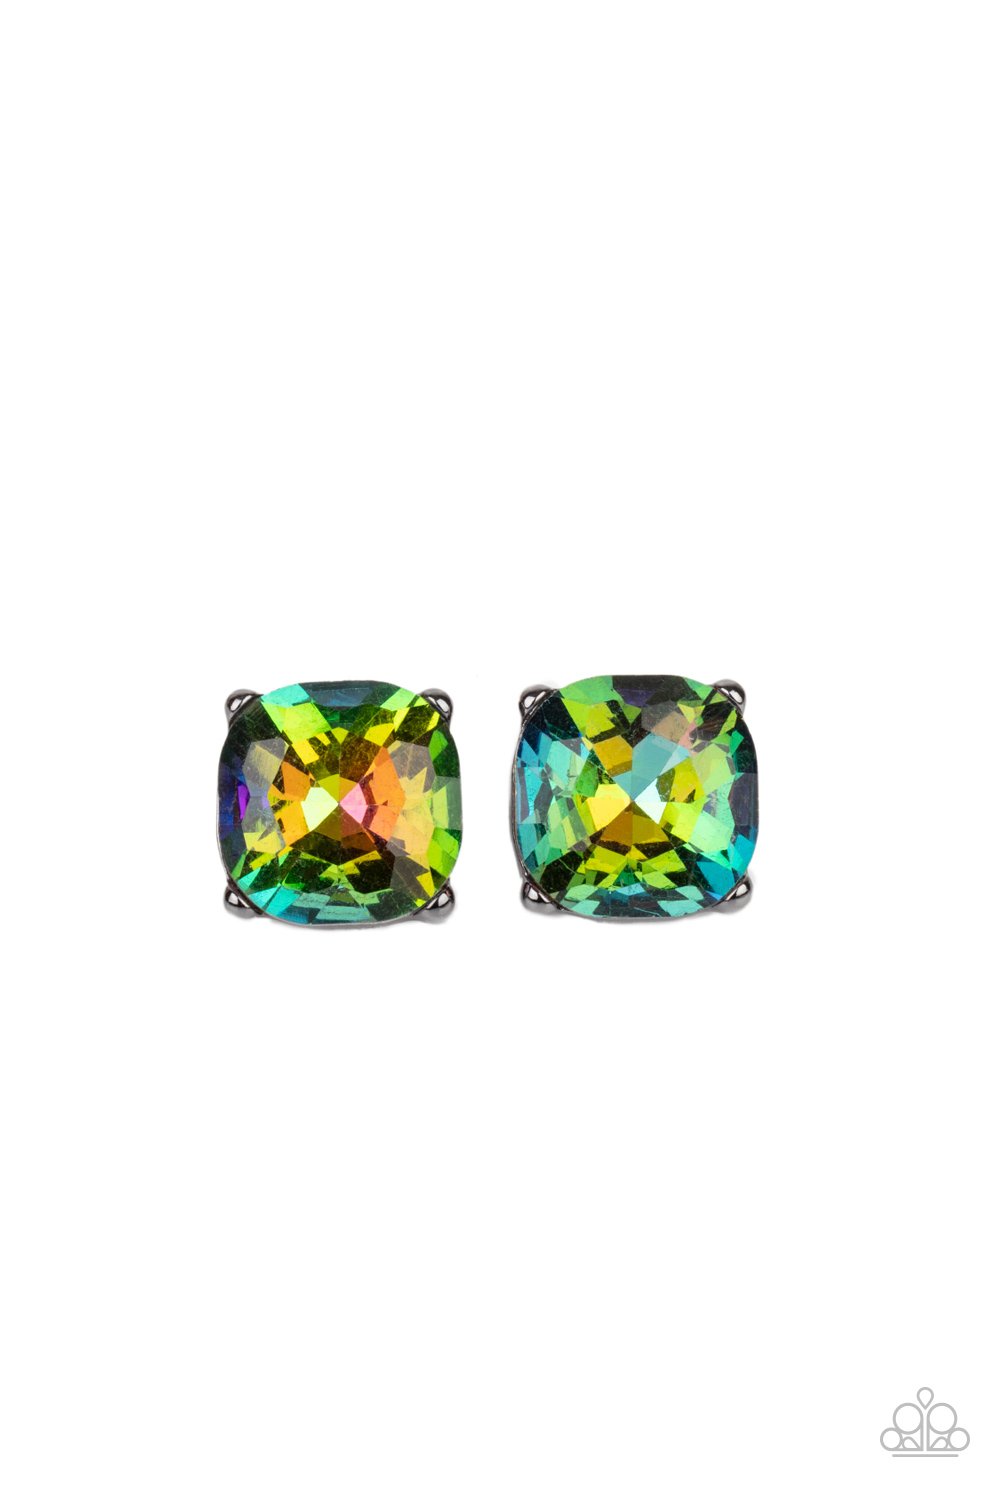 Paparazzi Accessories - Royalty High - Oil Spill Earrings